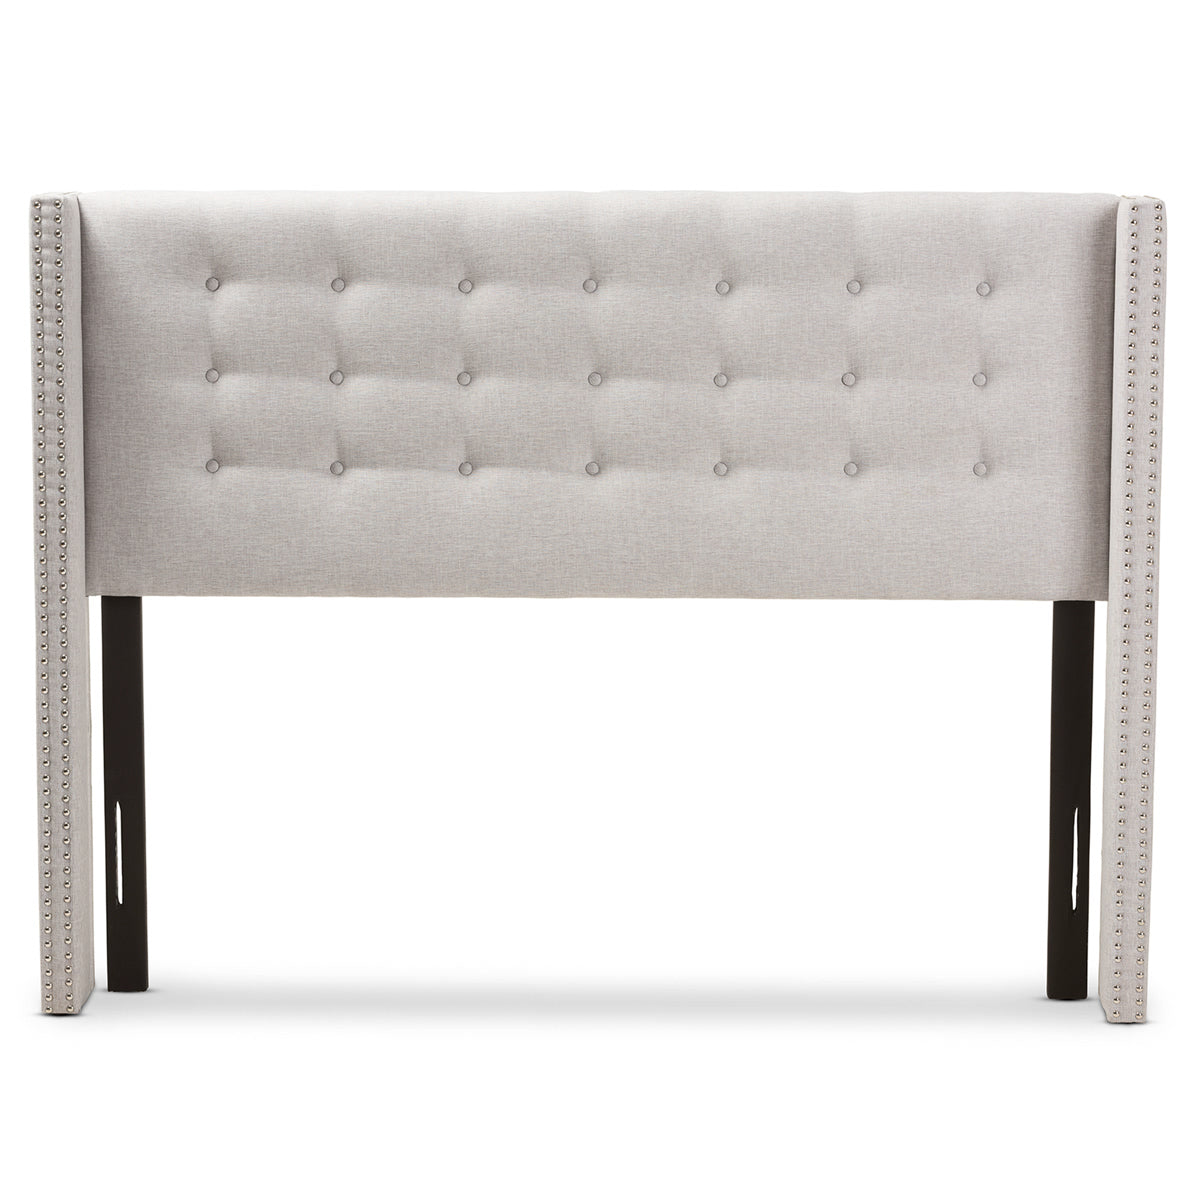 Baxton Studio Ginaro Modern And Contemporary Greyish Beige Fabric Button-Tufted Nail head King Size Winged Headboard Baxton Studio-Headboards-Minimal And Modern - 2